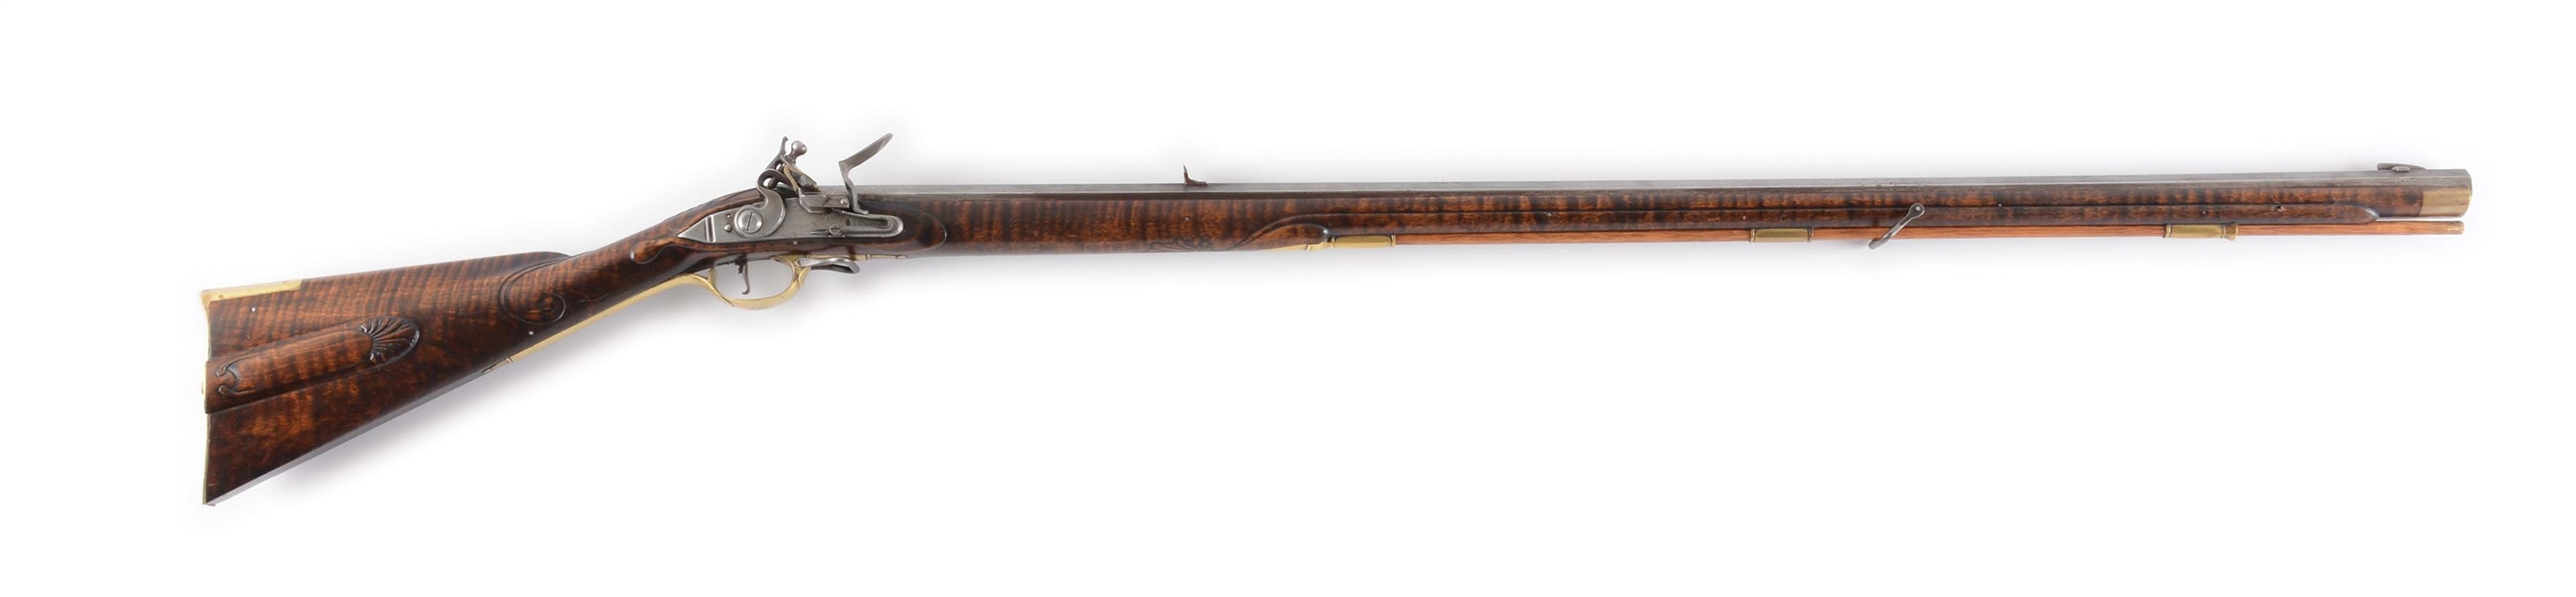 (A) CONTEMPORARY COPY OF AN EARLY KENTUCKY LONG RIFLE MADE BY L&J BARTLEY.